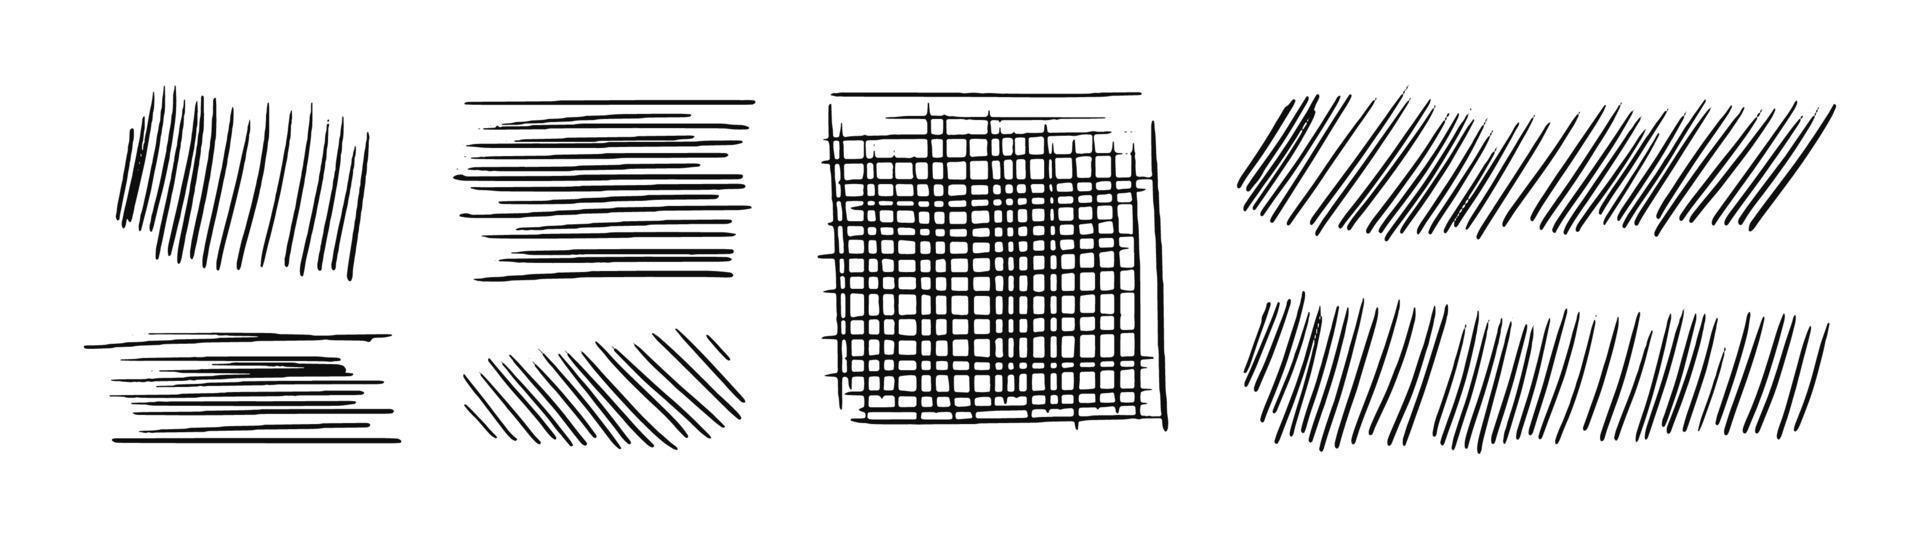 Drawn hatching lines and a square. Diagonal, vertical, or parallel strokes. A set of hand drawn hatched strikethrough doodles. Vector stock illustration isolated on white.